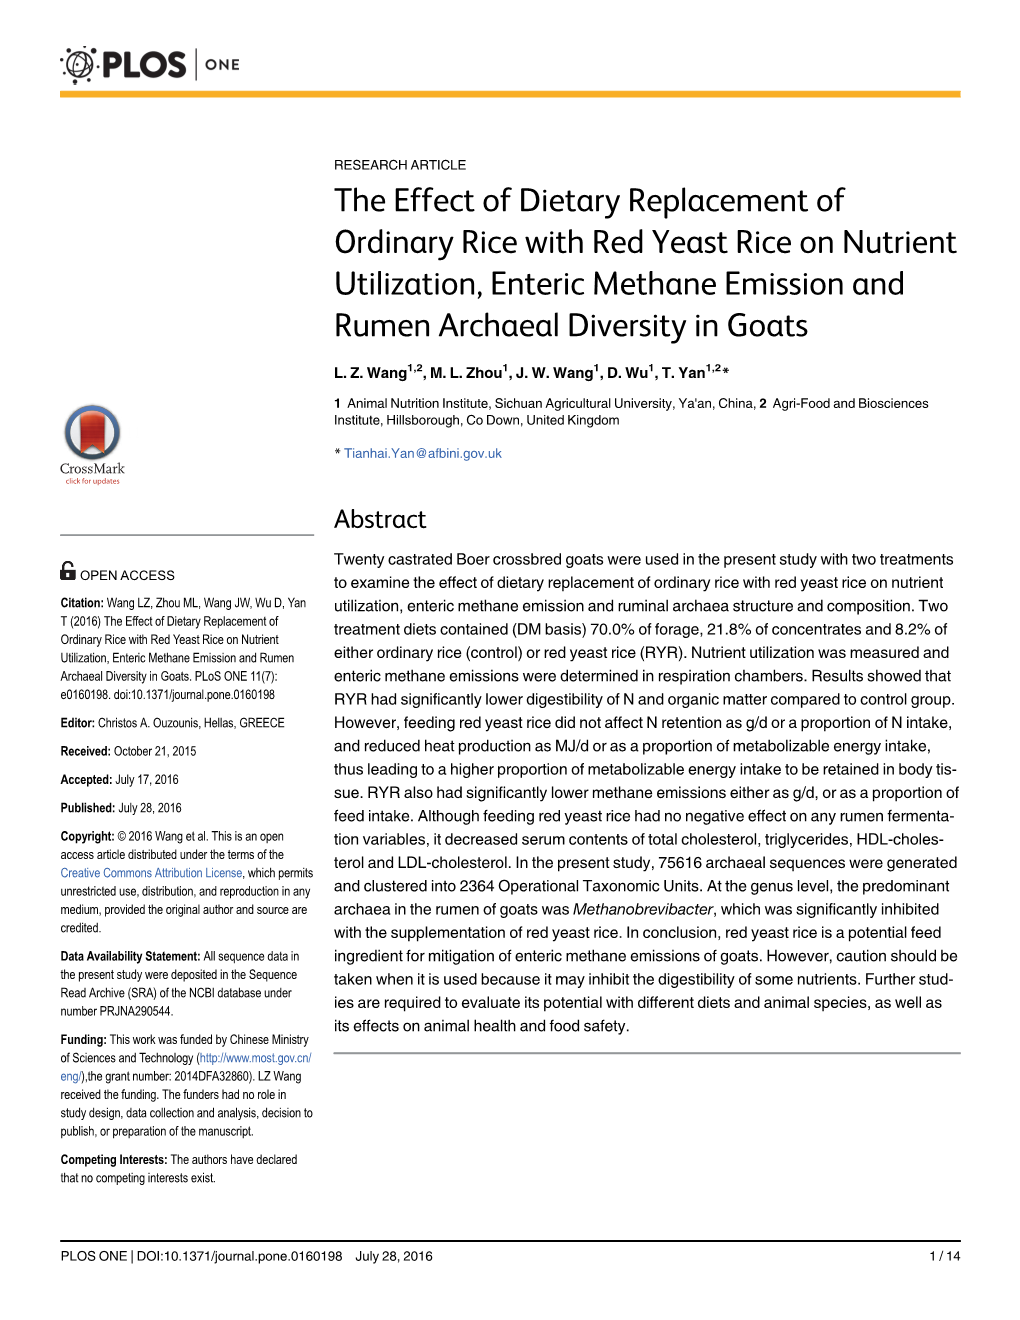 The Effect of Dietary Replacement of Ordinary Rice with Red Yeast Rice on Nutrient Utilization, Enteric Methane Emission and Rumen Archaeal Diversity in Goats